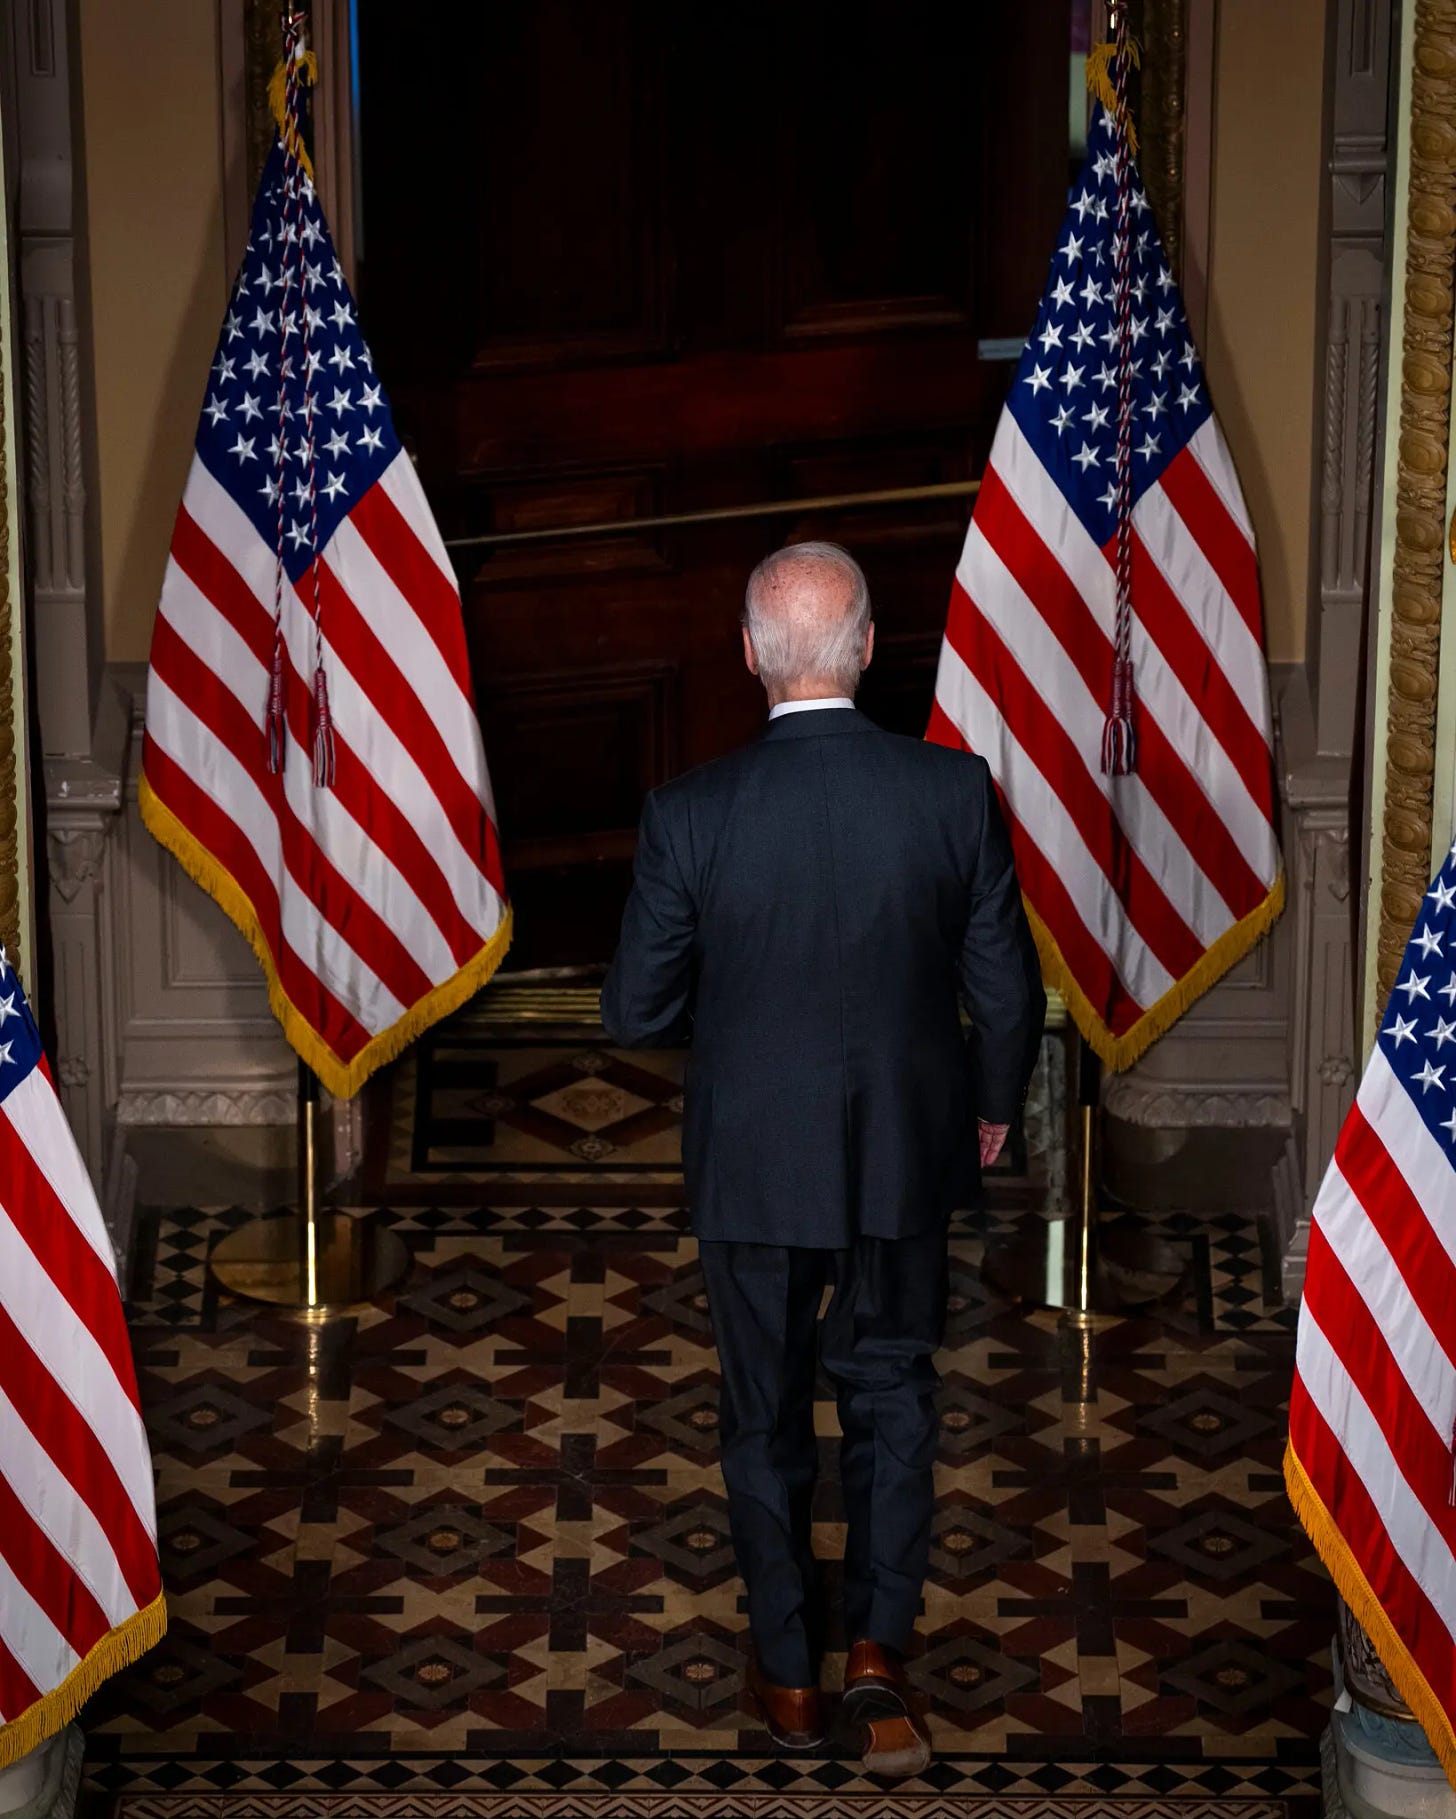 Throwing Shade: The Disturbing Visual Fallout From the Special Counsel's Attack on Biden's Competency